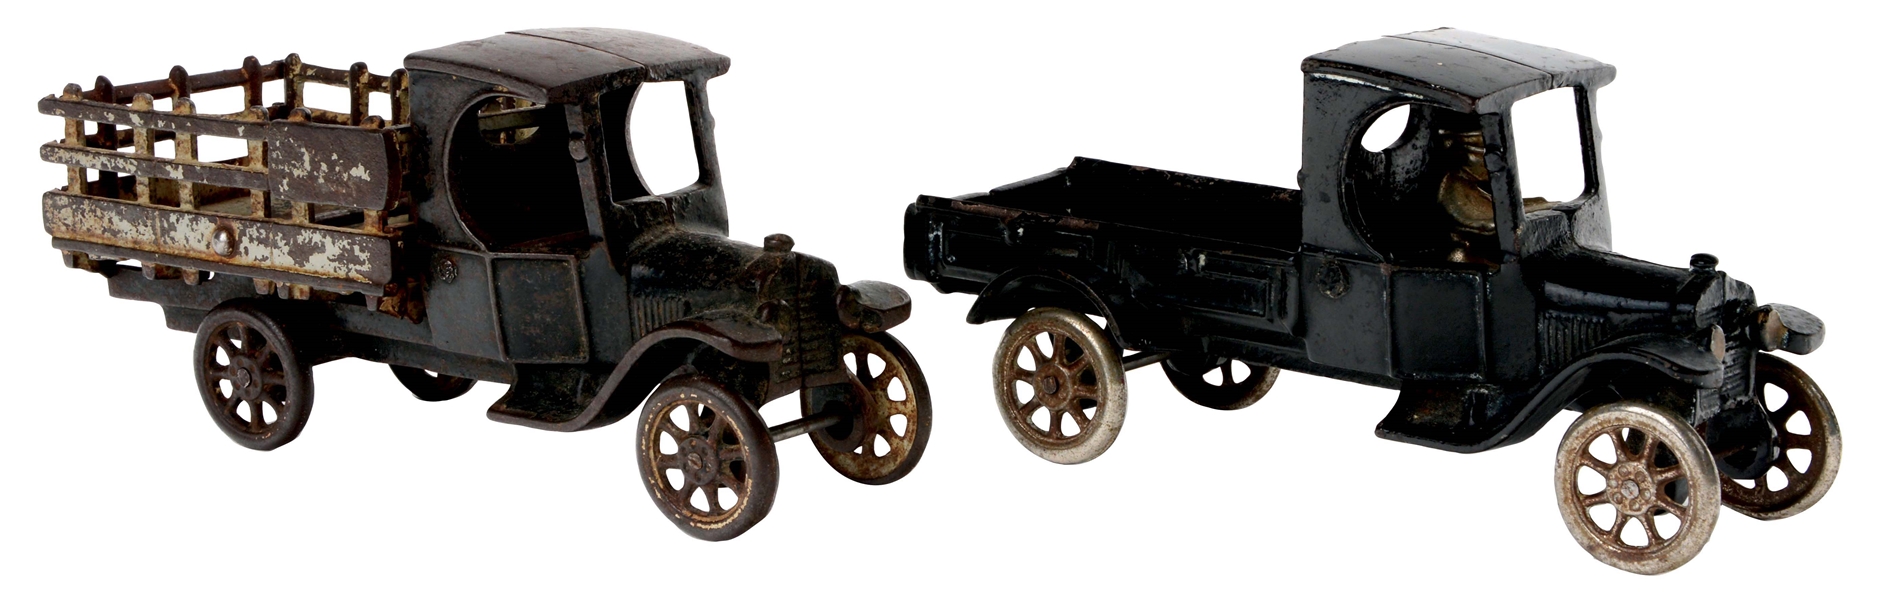 LOT OF 2: ARCADE EARLY 1920S FORD TRUCKS.